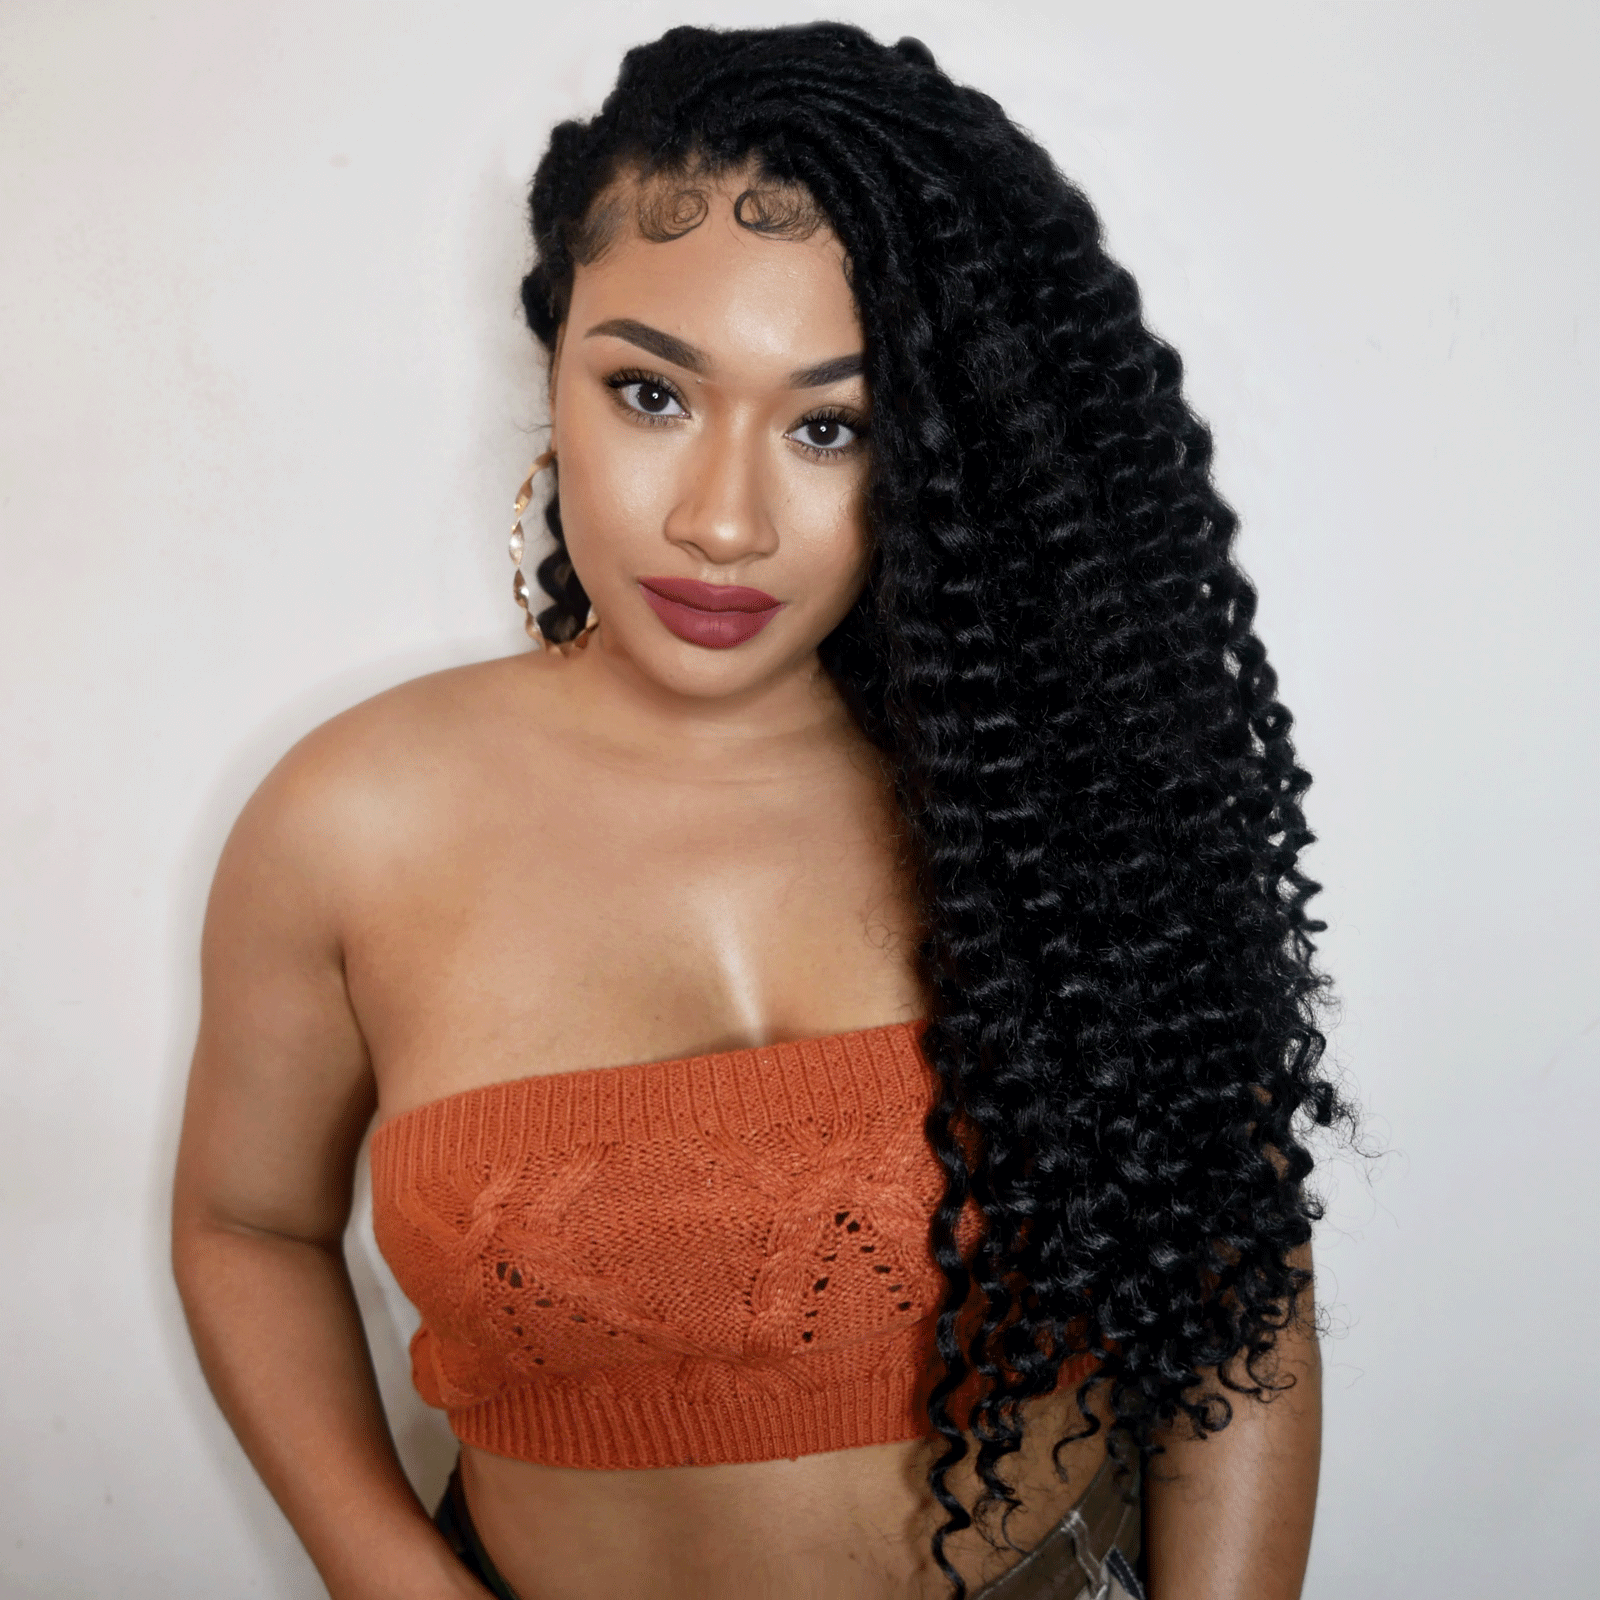 TOYOTRESS UNIQUE DEEP WAVE LOCS CROCHET | CROCHET FRENCH LOCS WITH LONG CURLY ENDS CROCHET HAIR PRE LOOPED DEEP WAVE LOCS BRAIDING HAIR FOR WOMEN